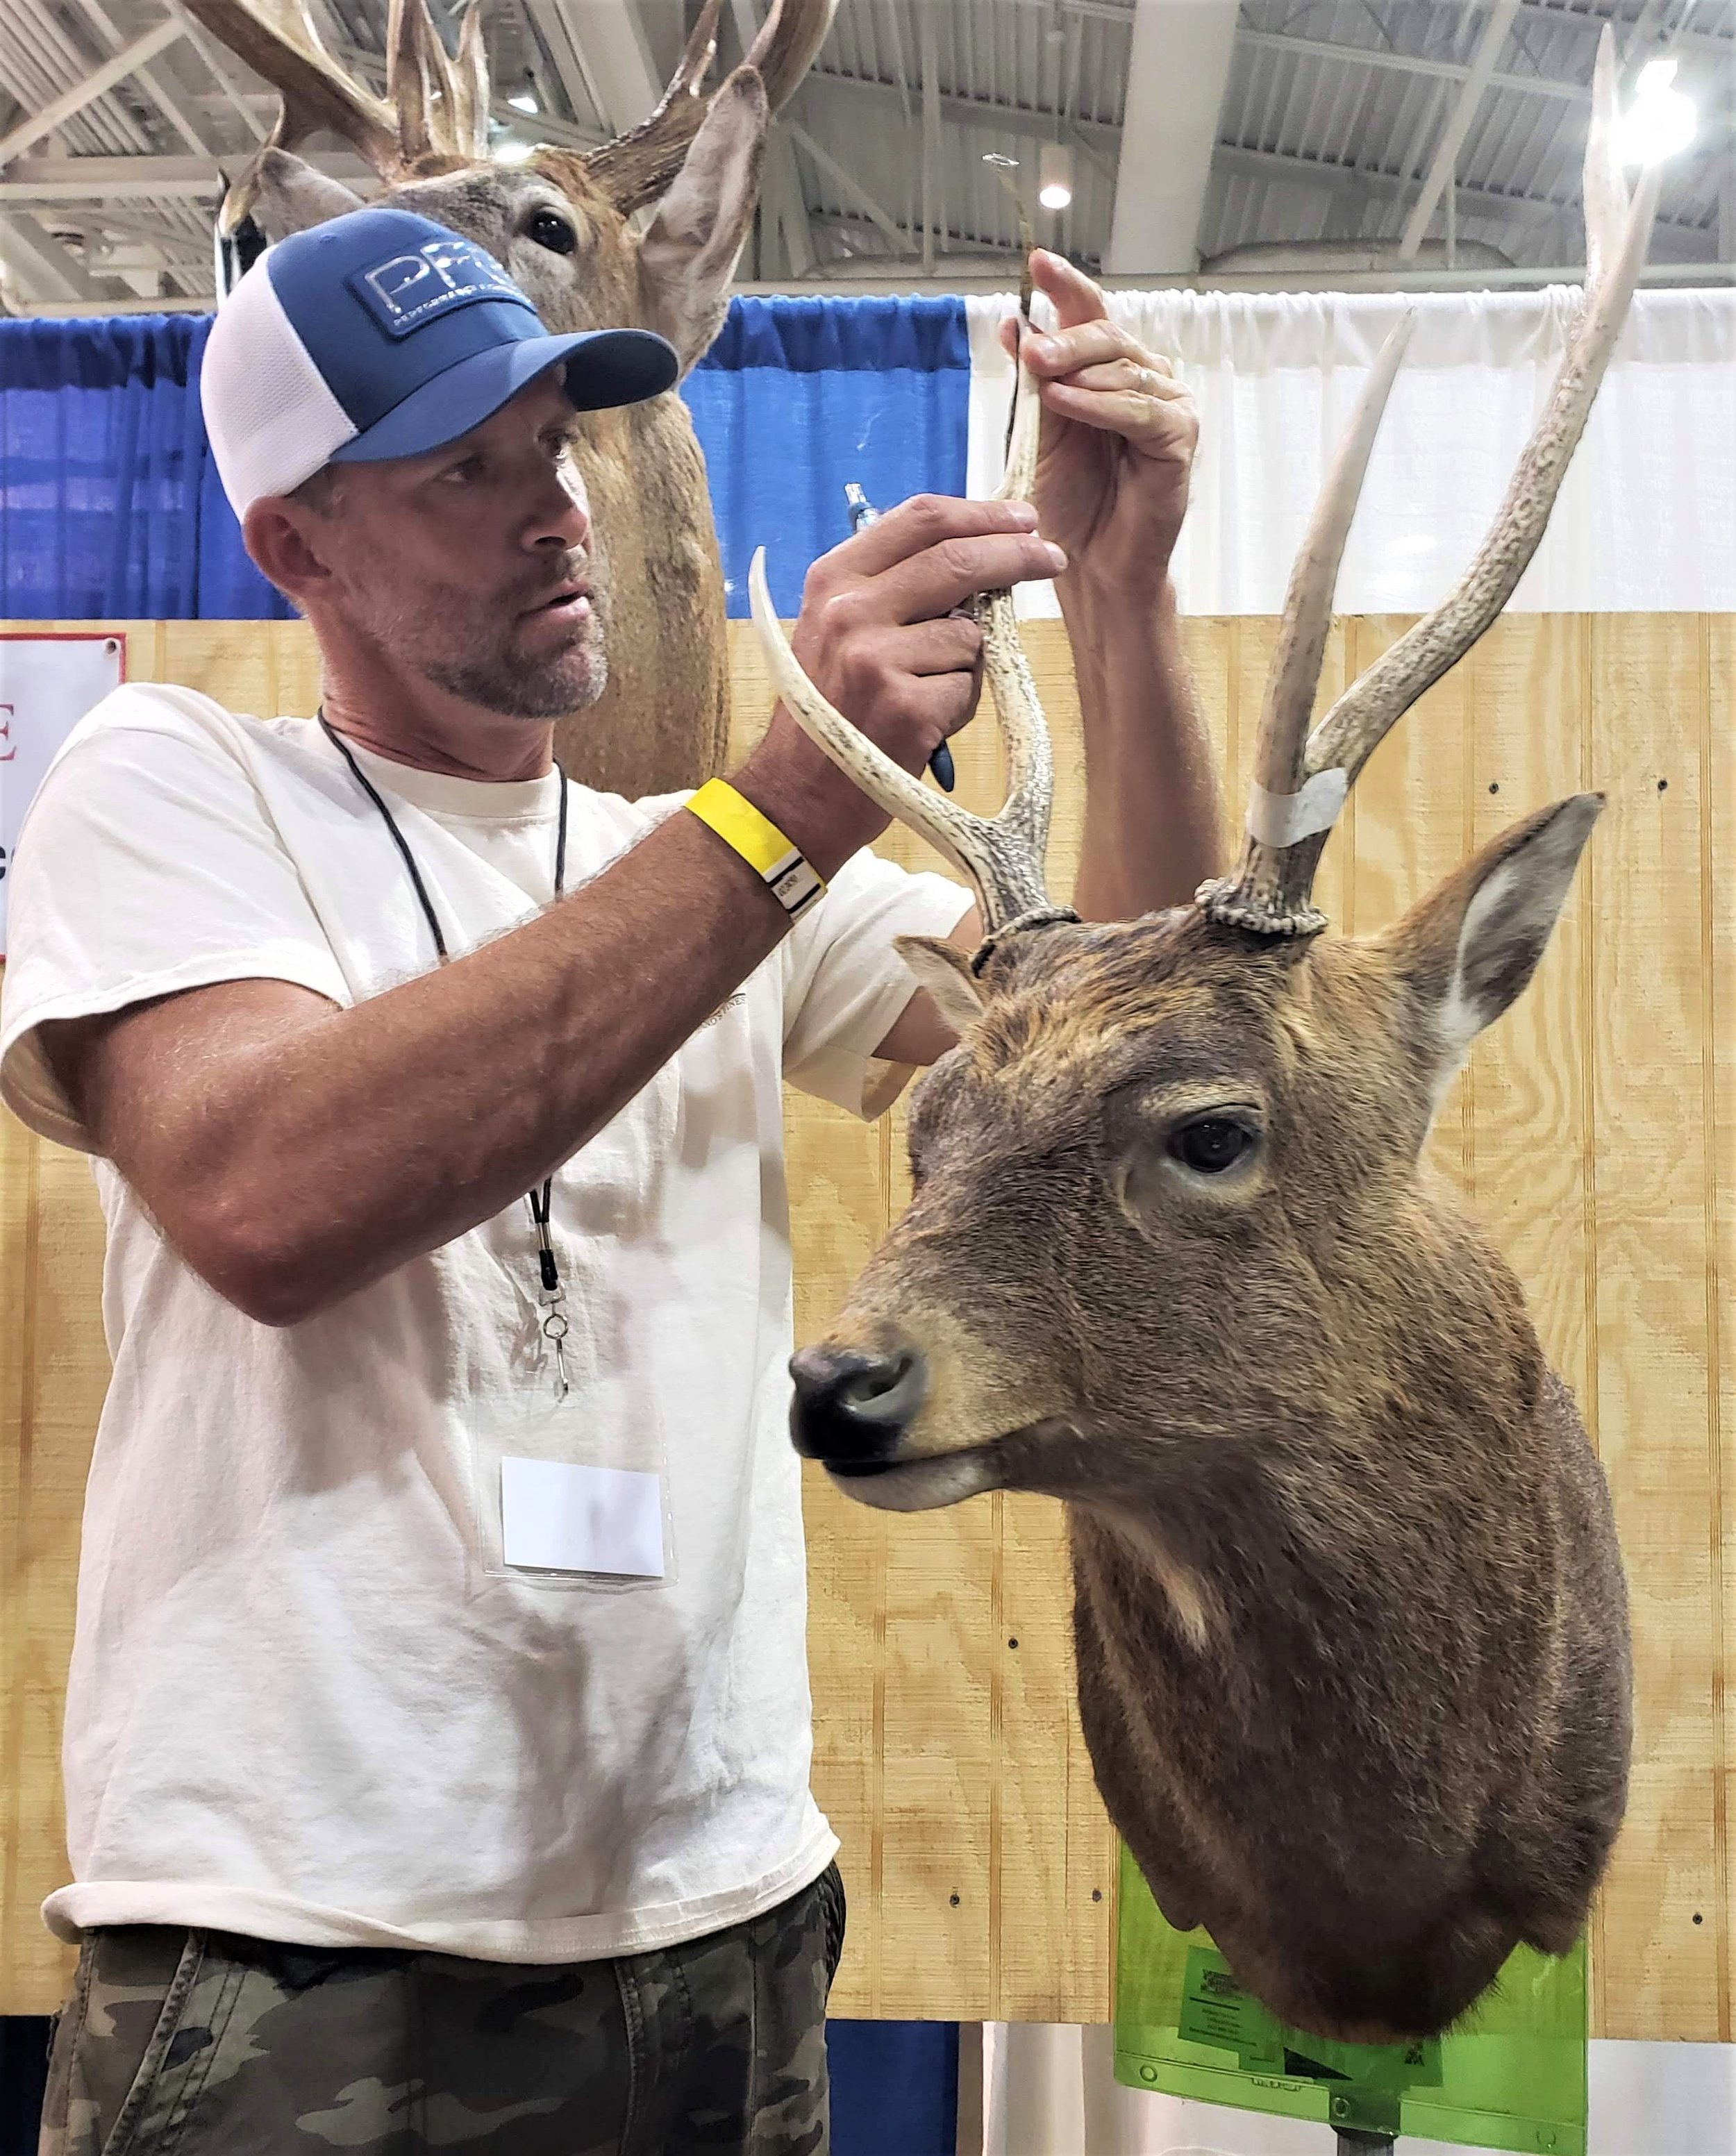 Measuring and Scoring Mule and Blacktail Deer - B&C Club Official Guide